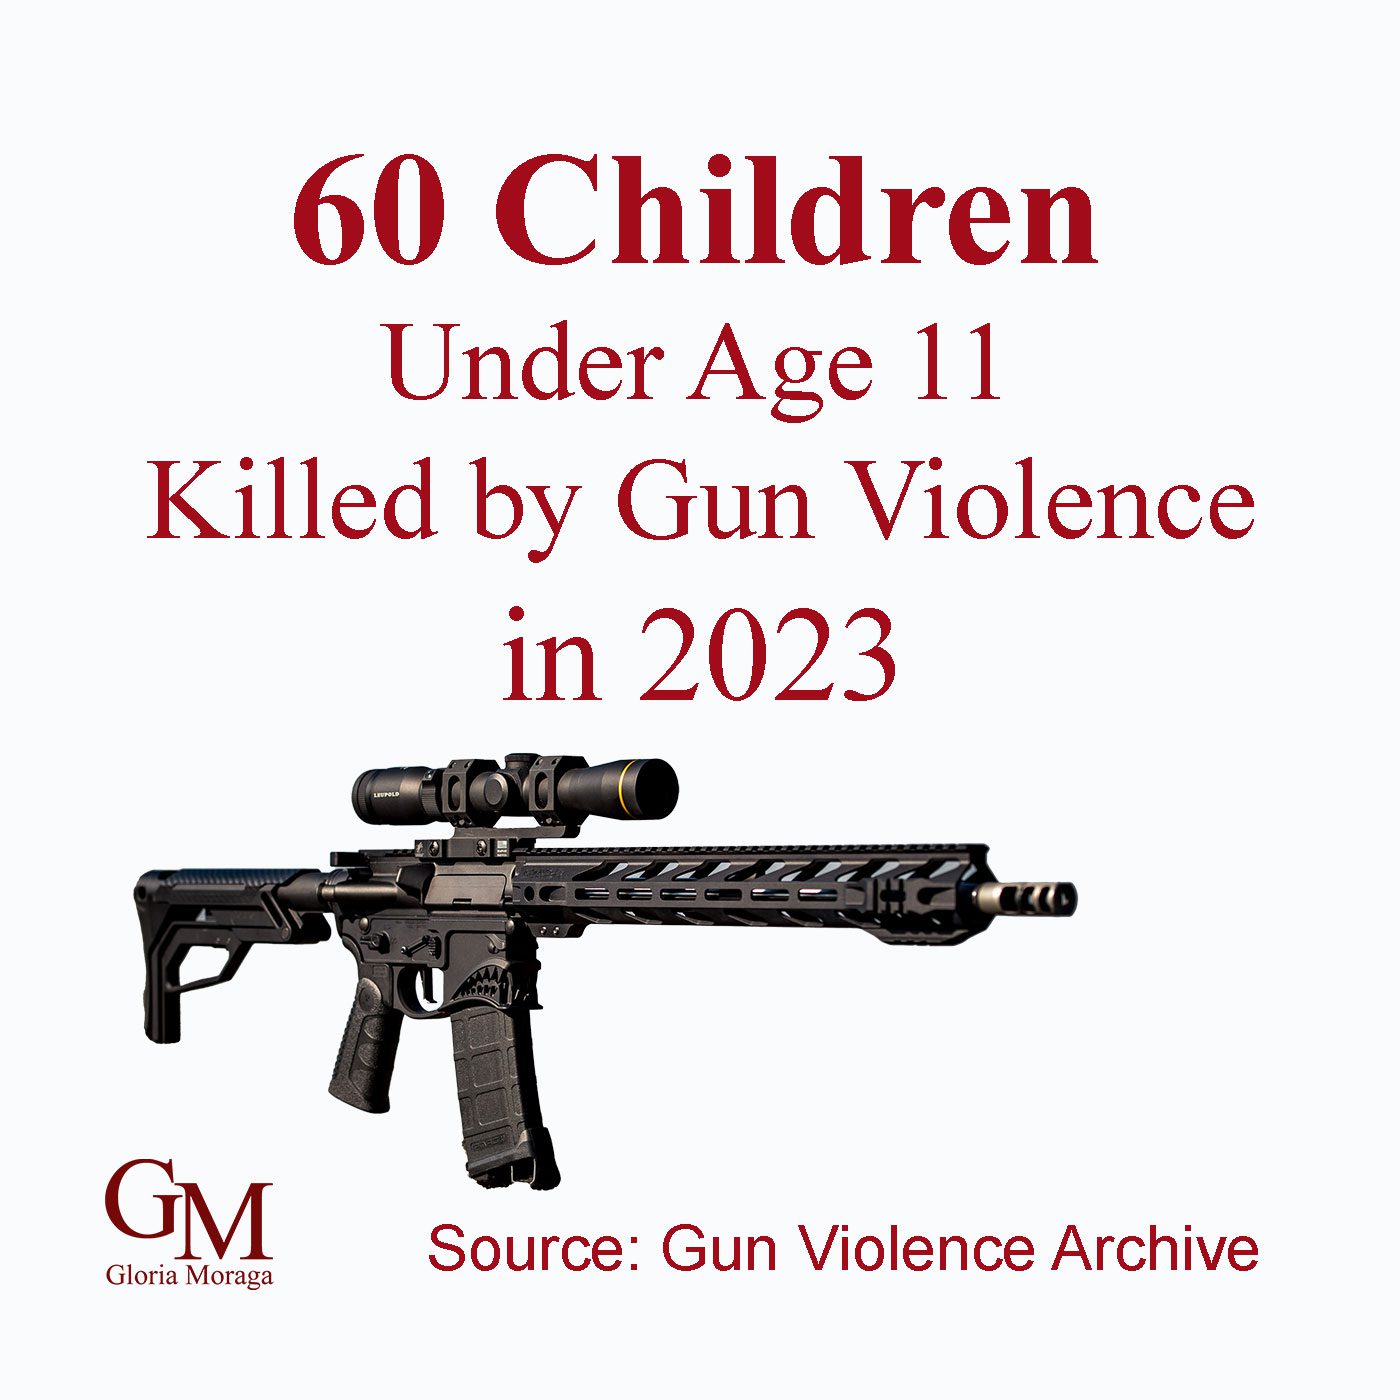 60 Children Under the Age of 11 Killed by Gun Violence in 2023 Source: Gun Violence Archive